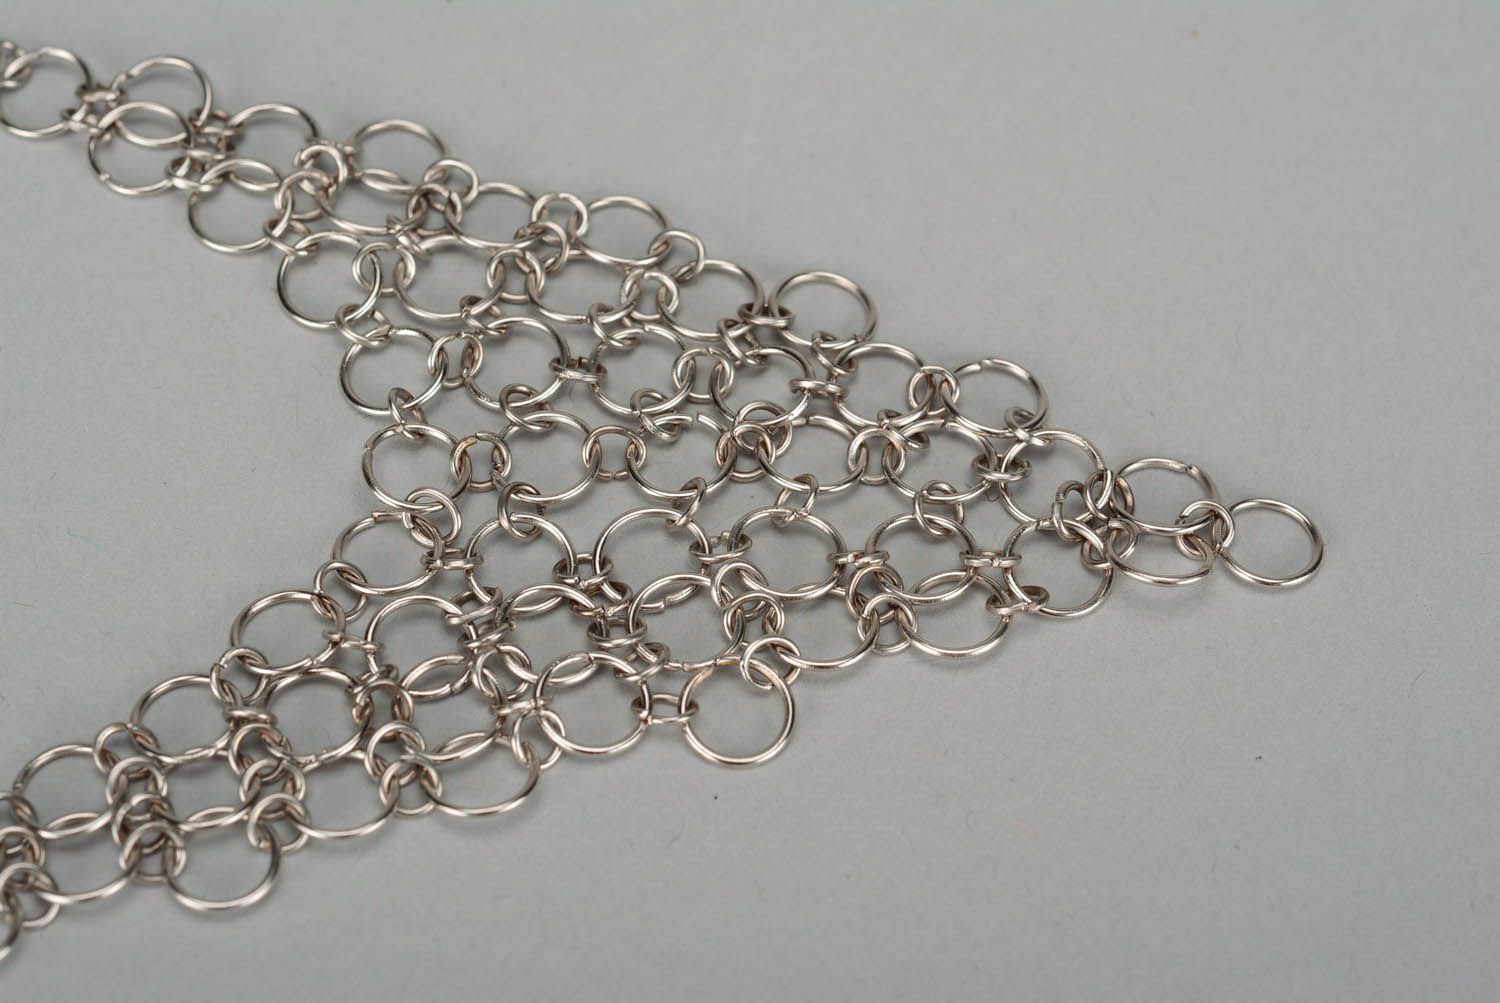 Necklace made of metal rings photo 1